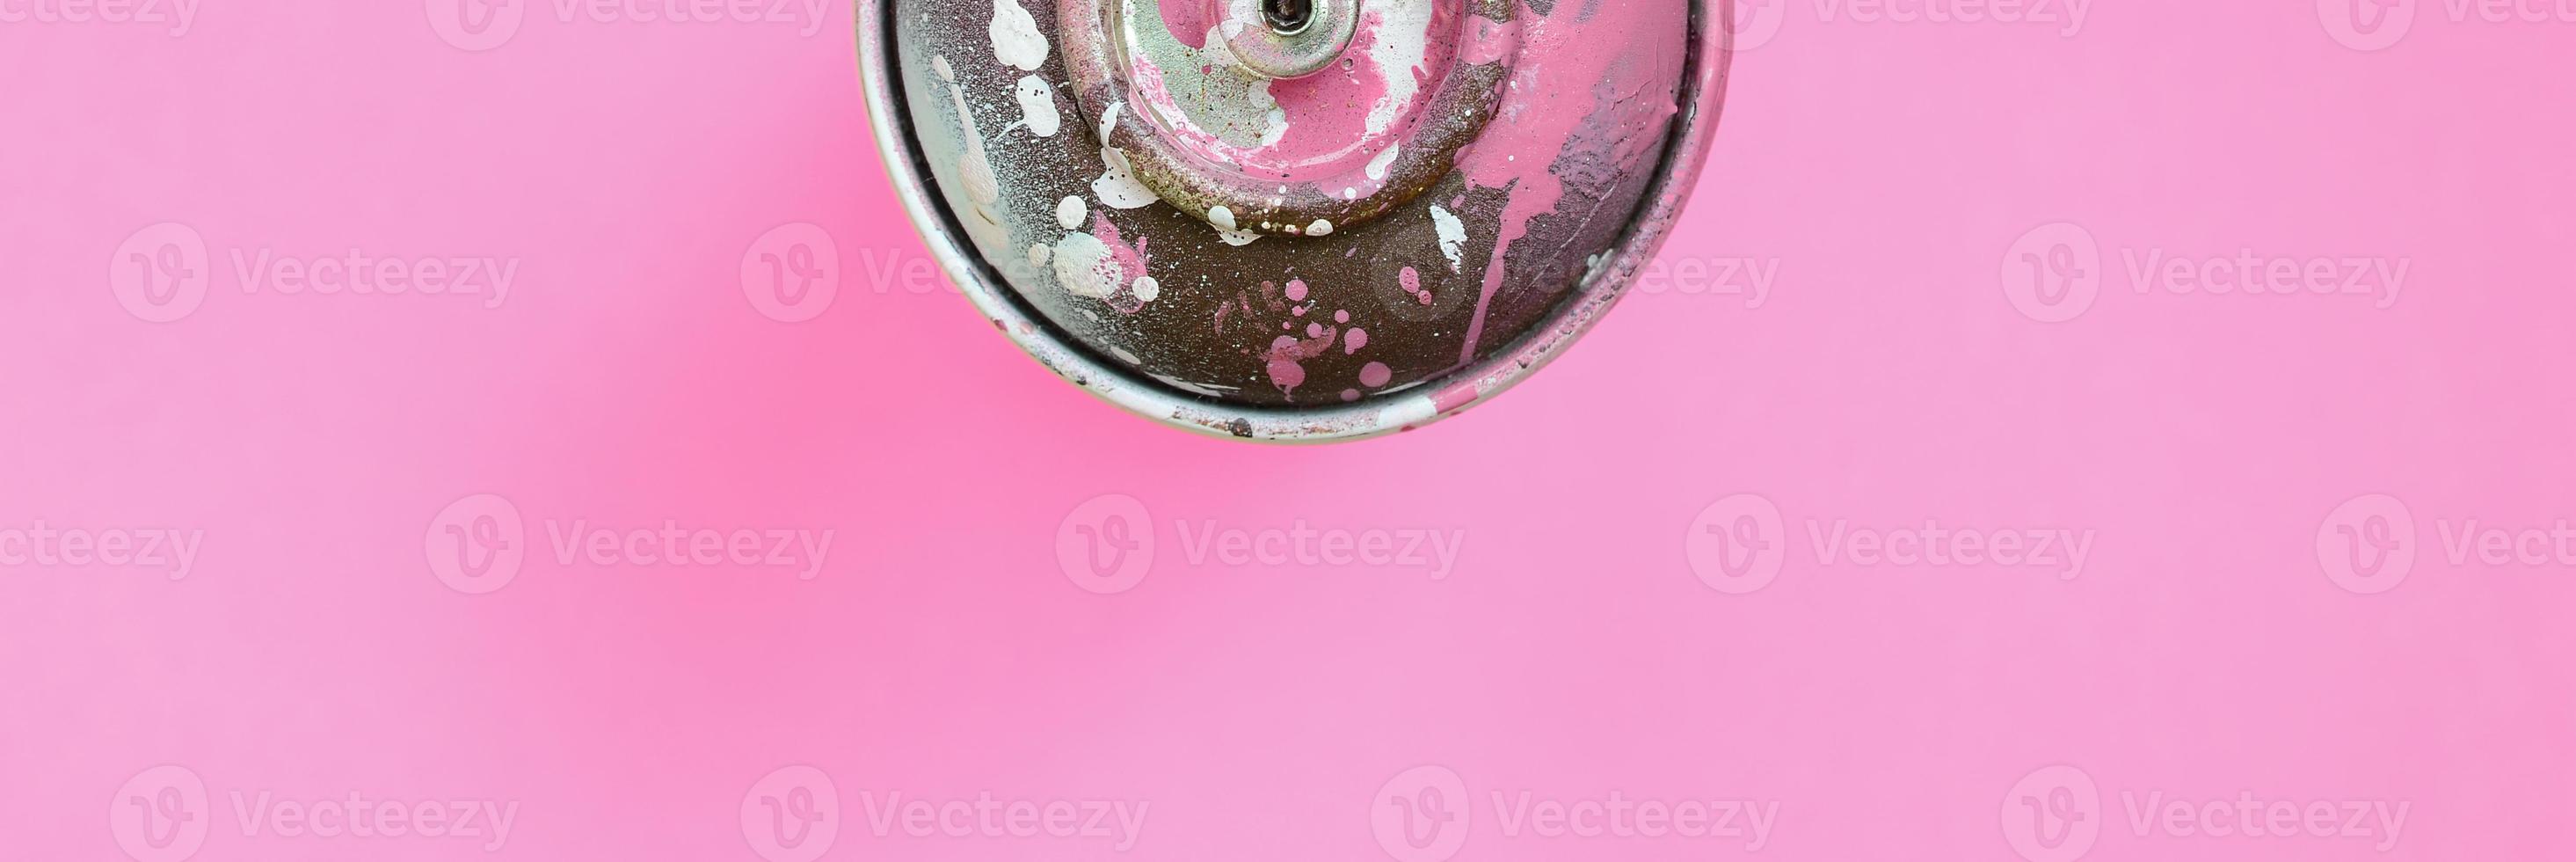 Used spray can with pink paint drips lie on texture background of fashion pastel pink color paper in minimal concept photo